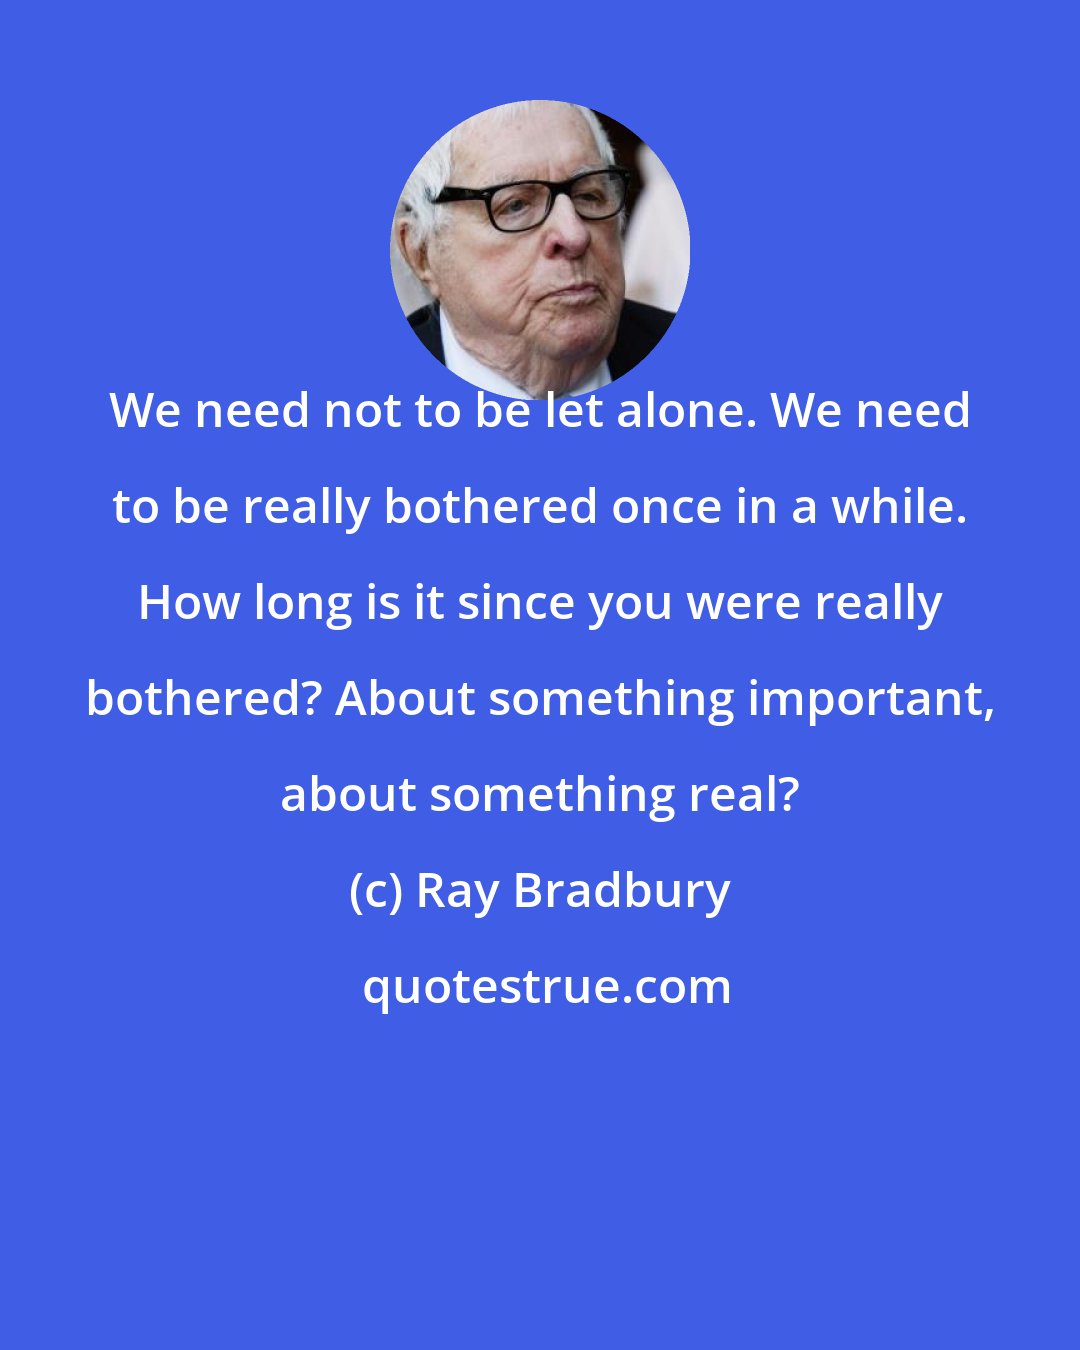 Ray Bradbury: We need not to be let alone. We need to be really bothered once in a while. How long is it since you were really bothered? About something important, about something real?